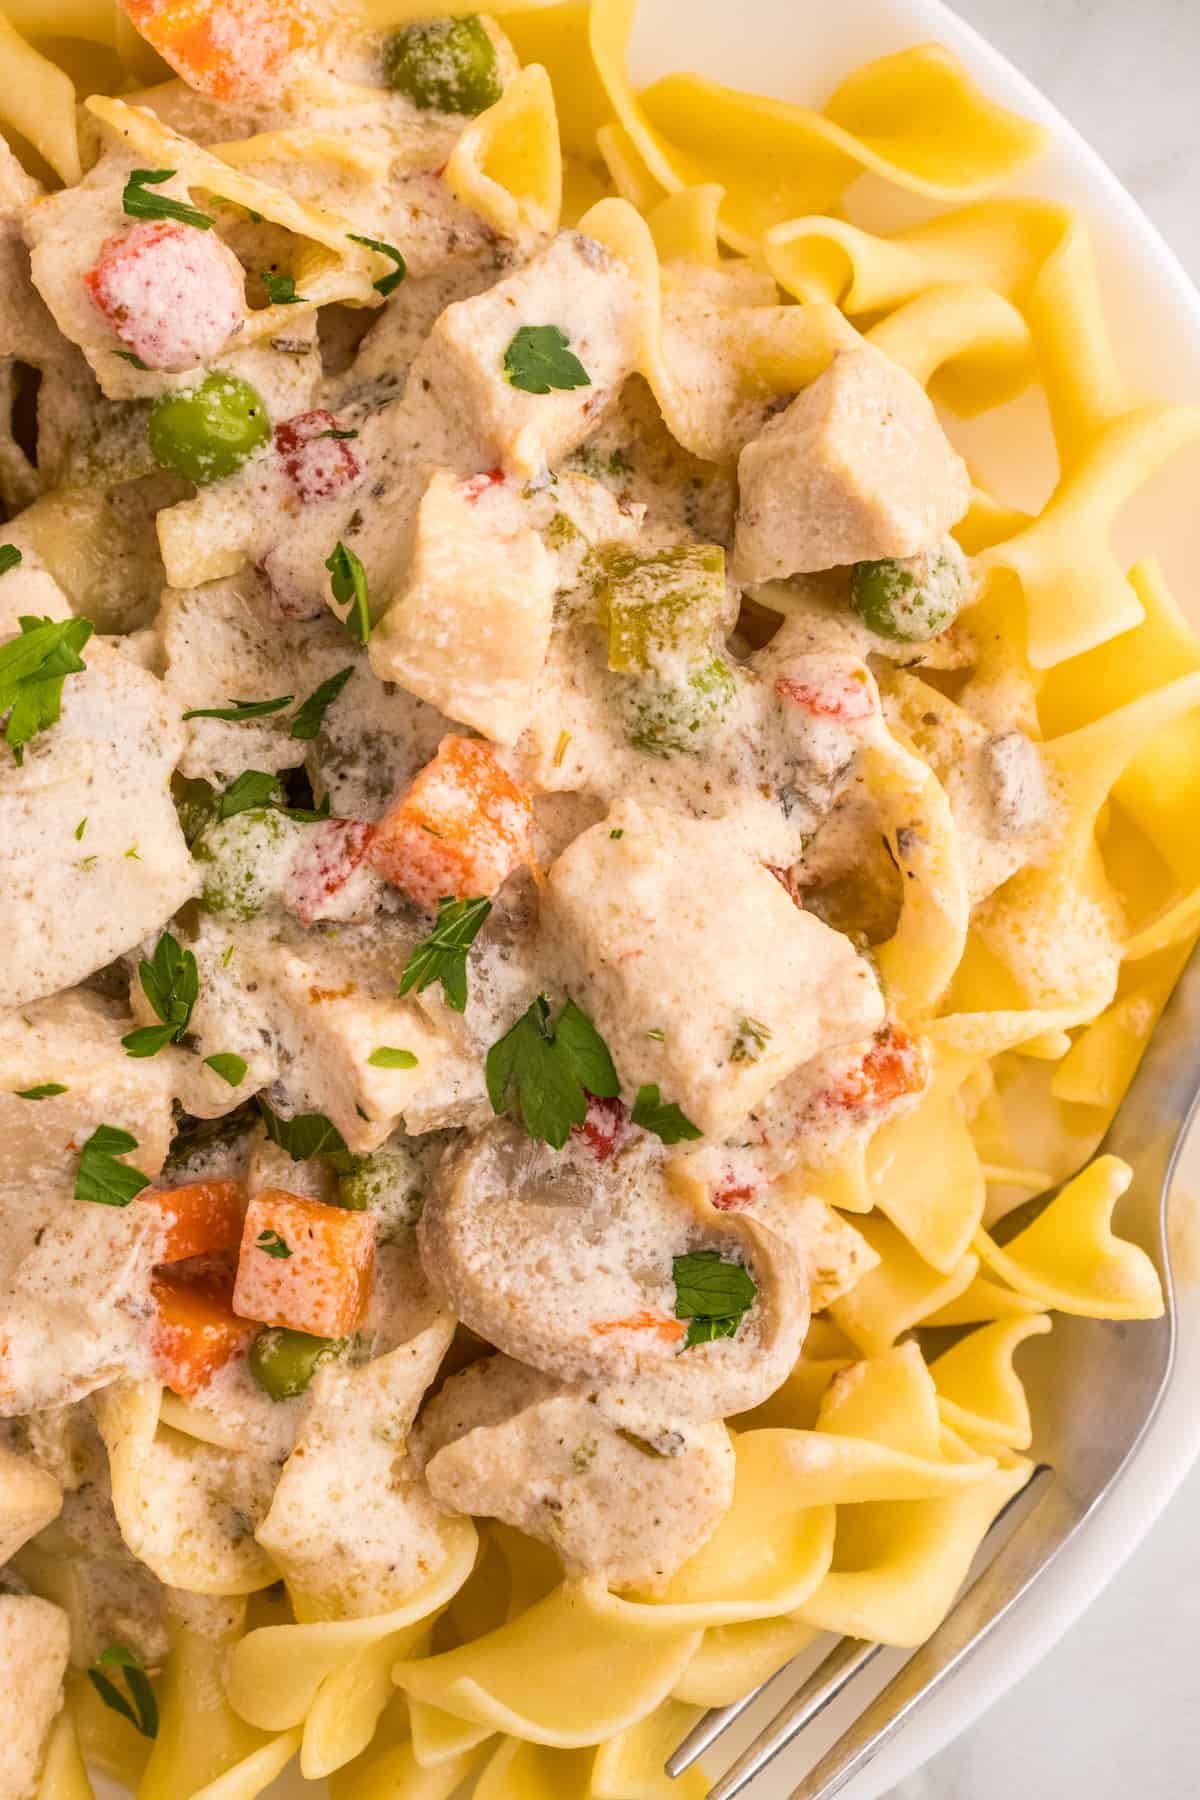 A slow cooker dish featuring tender chicken and freshly cut vegetables served over a bed of pasta.